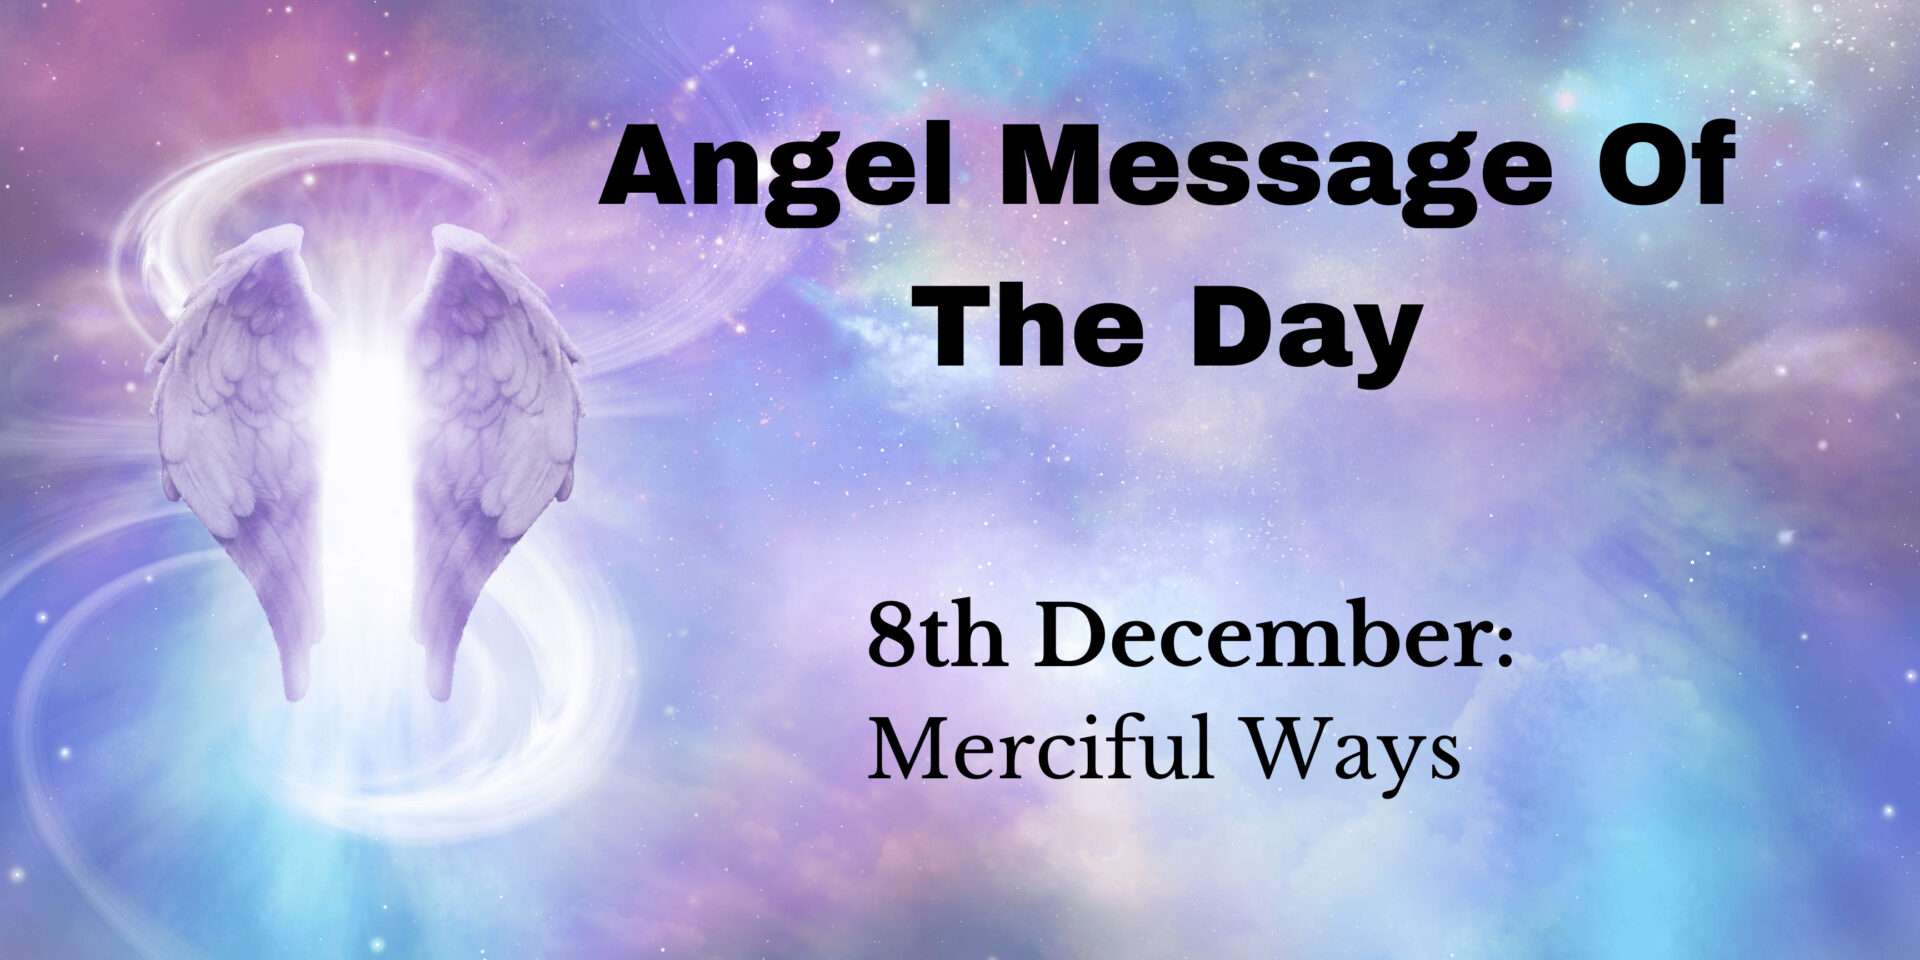 angel message of the day : merciful ways